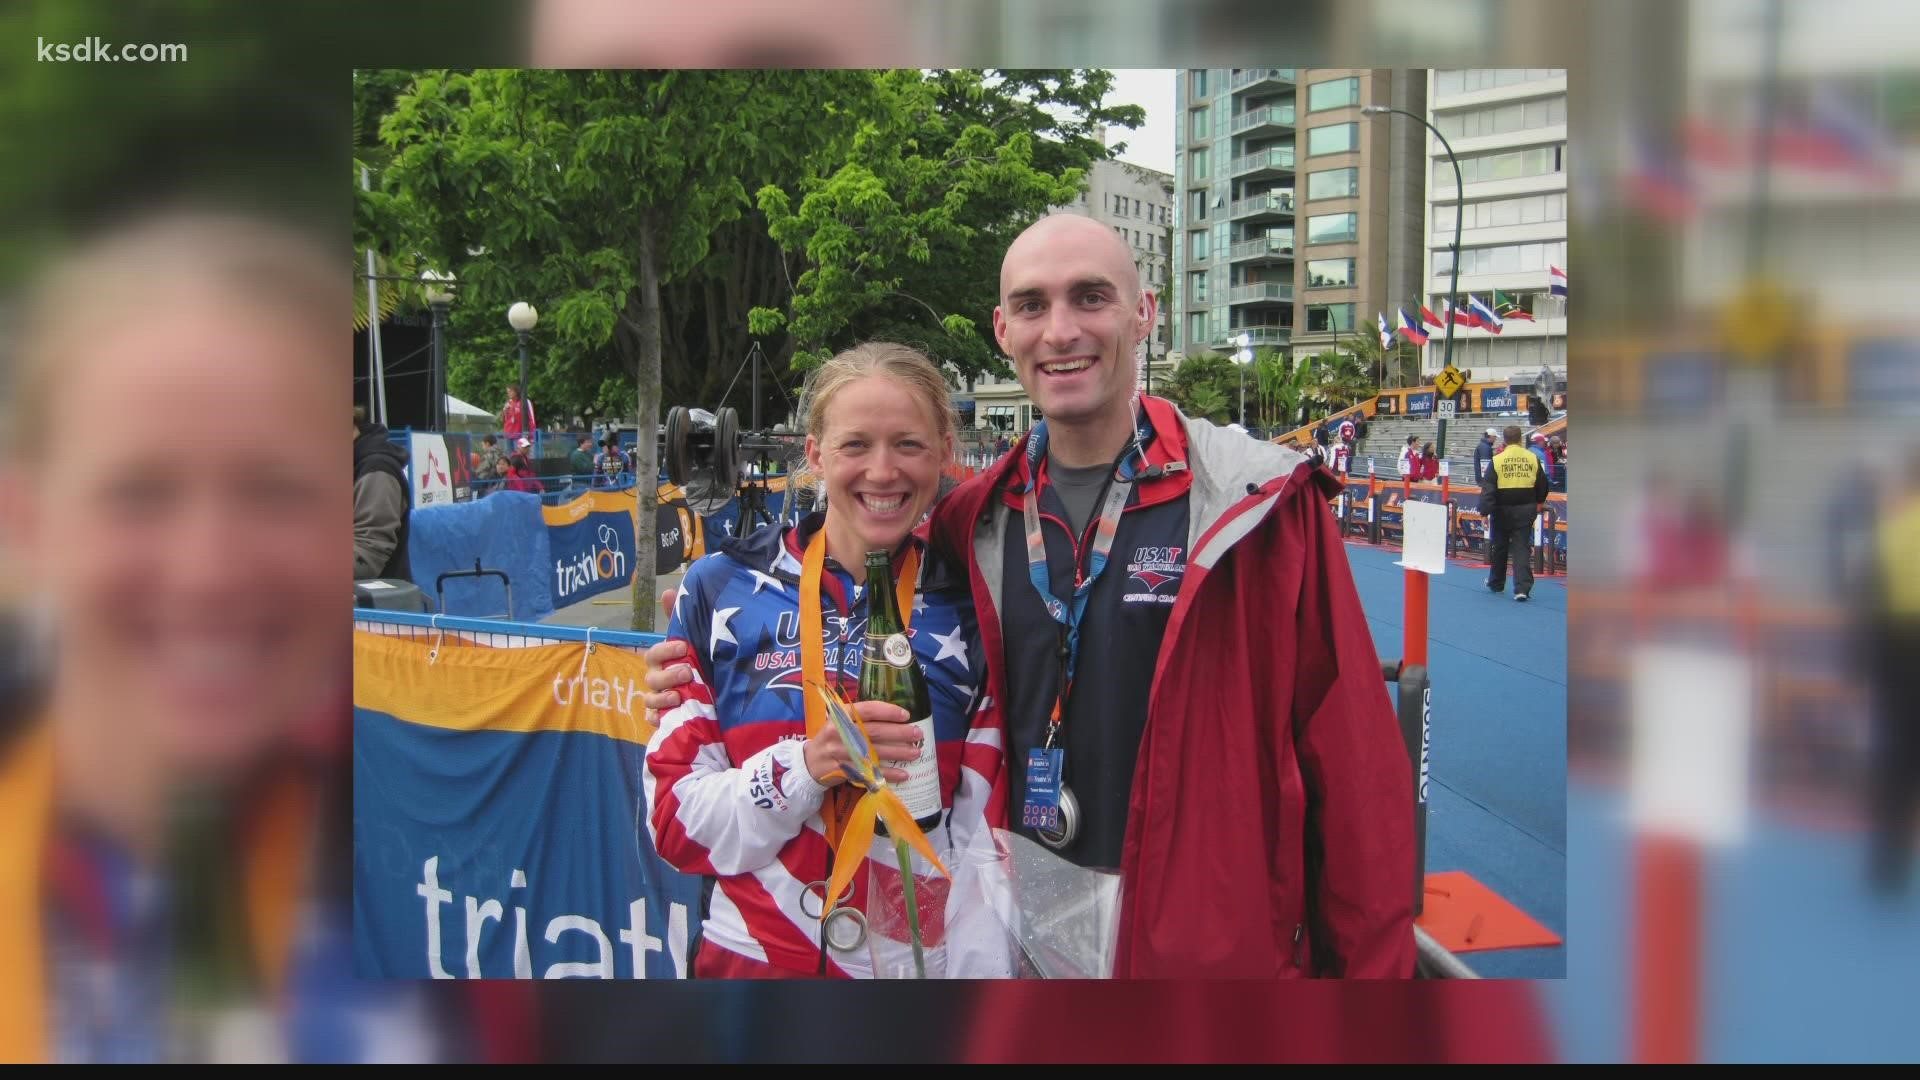 Parkway South grad Sarah Haskins knows what it takes to be an Olympian. She became one of the best tri-athletes in the world and competed for Team USA in 2008.